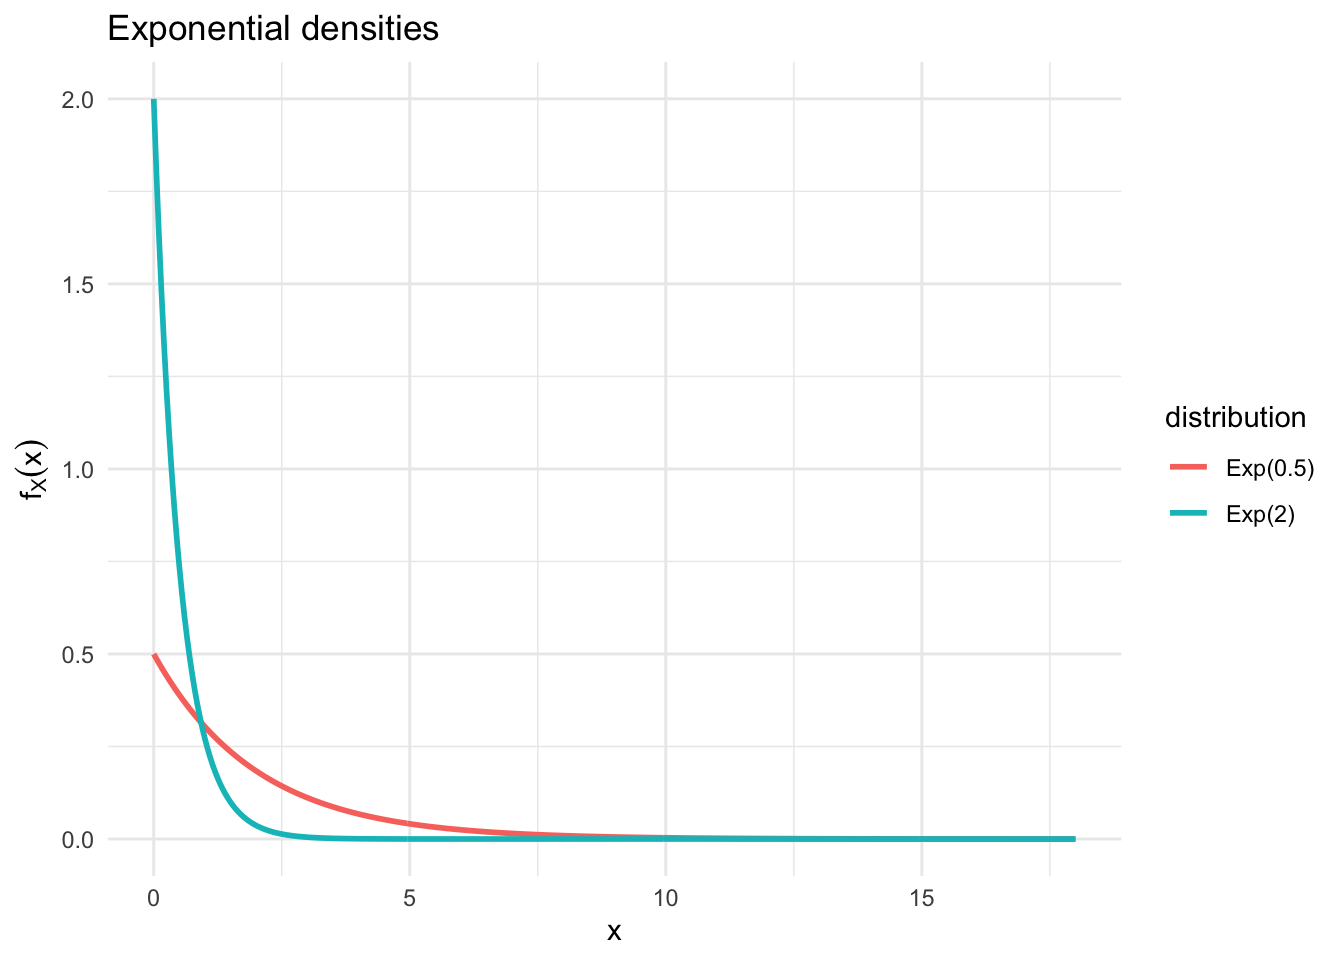 Graphical Illustration of Exponential distributions with varying $\lambda$